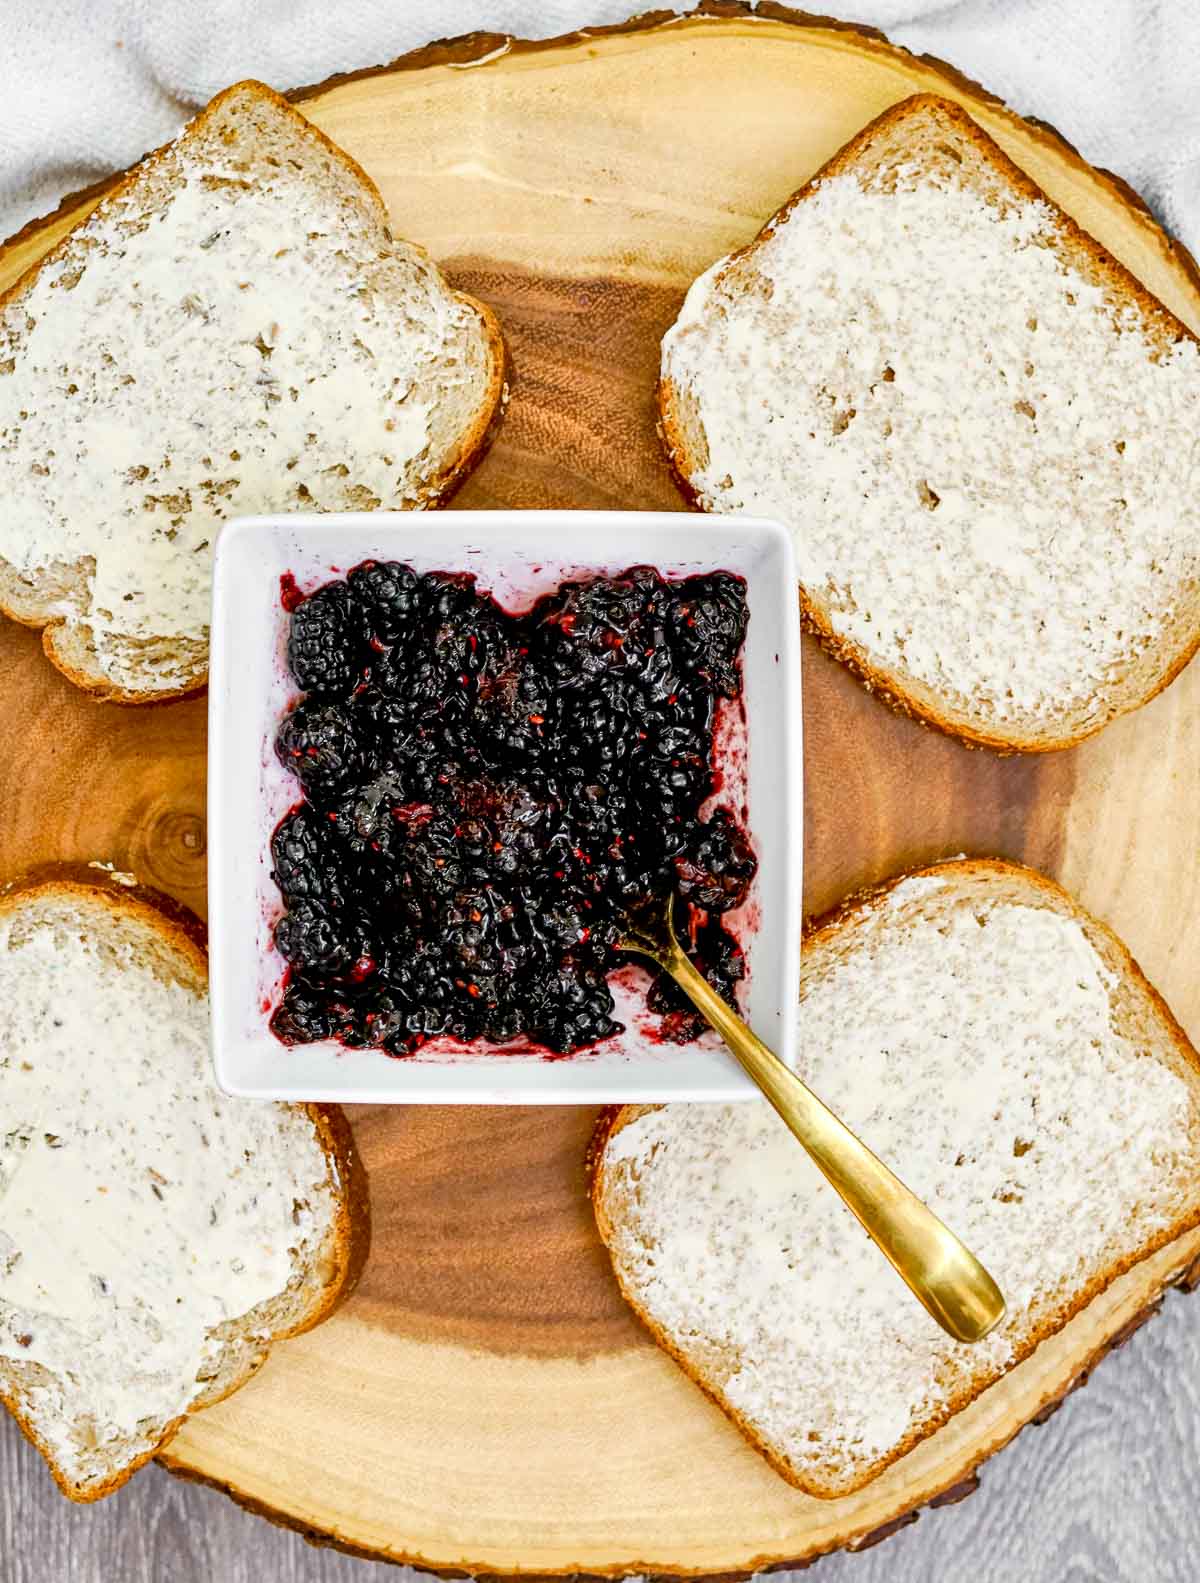 Mashed blackberries in a bowl